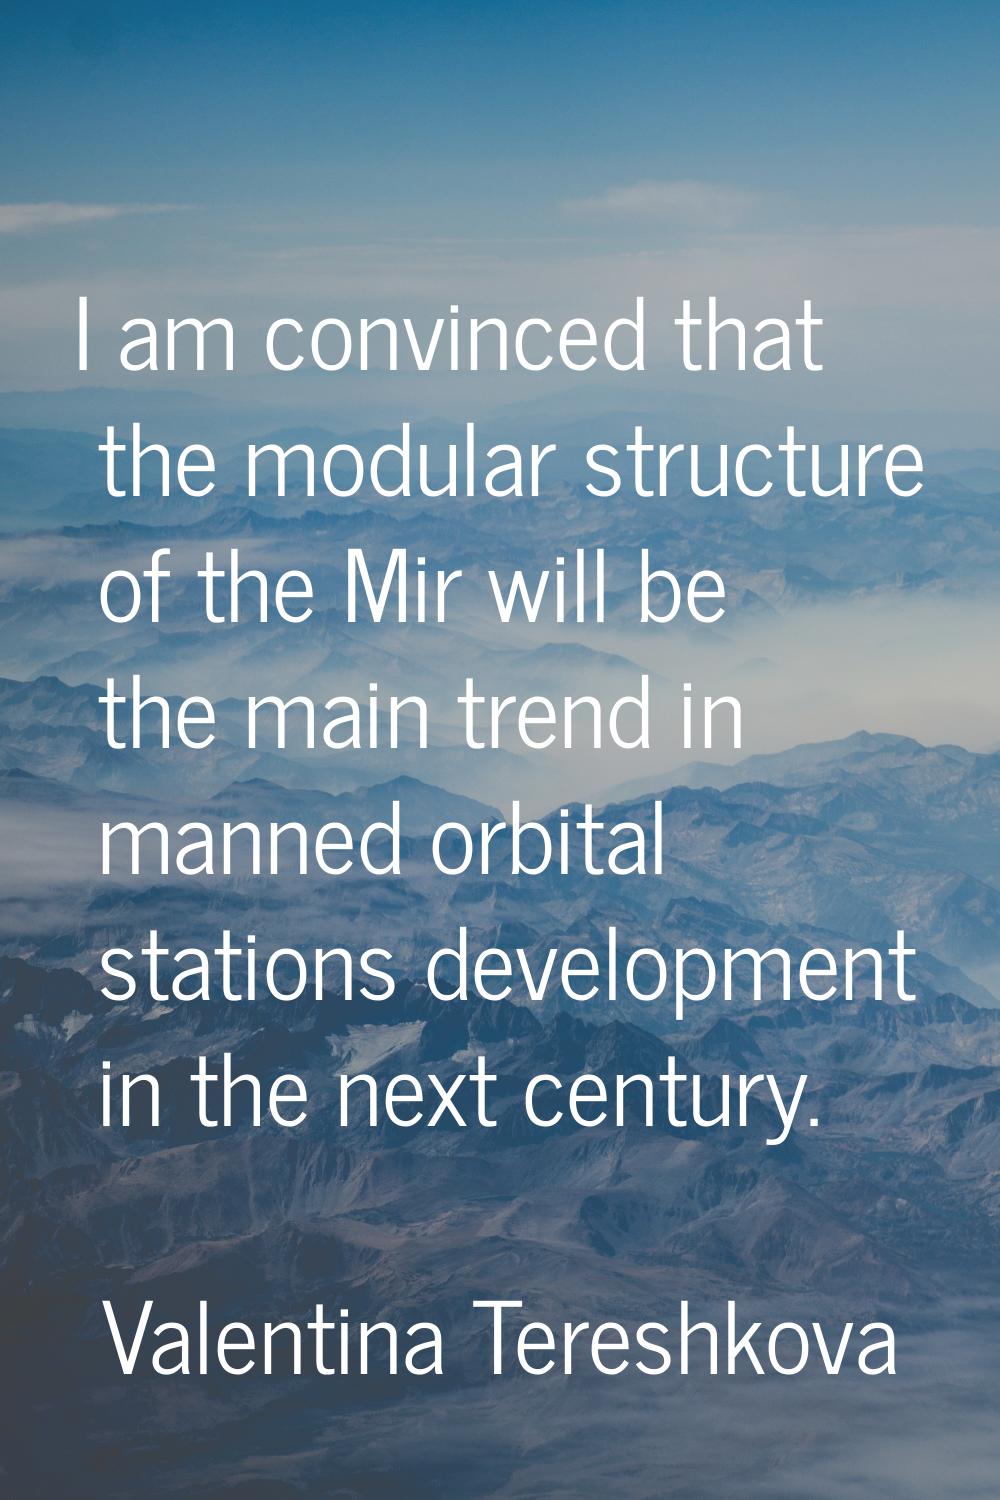 I am convinced that the modular structure of the Mir will be the main trend in manned orbital stati